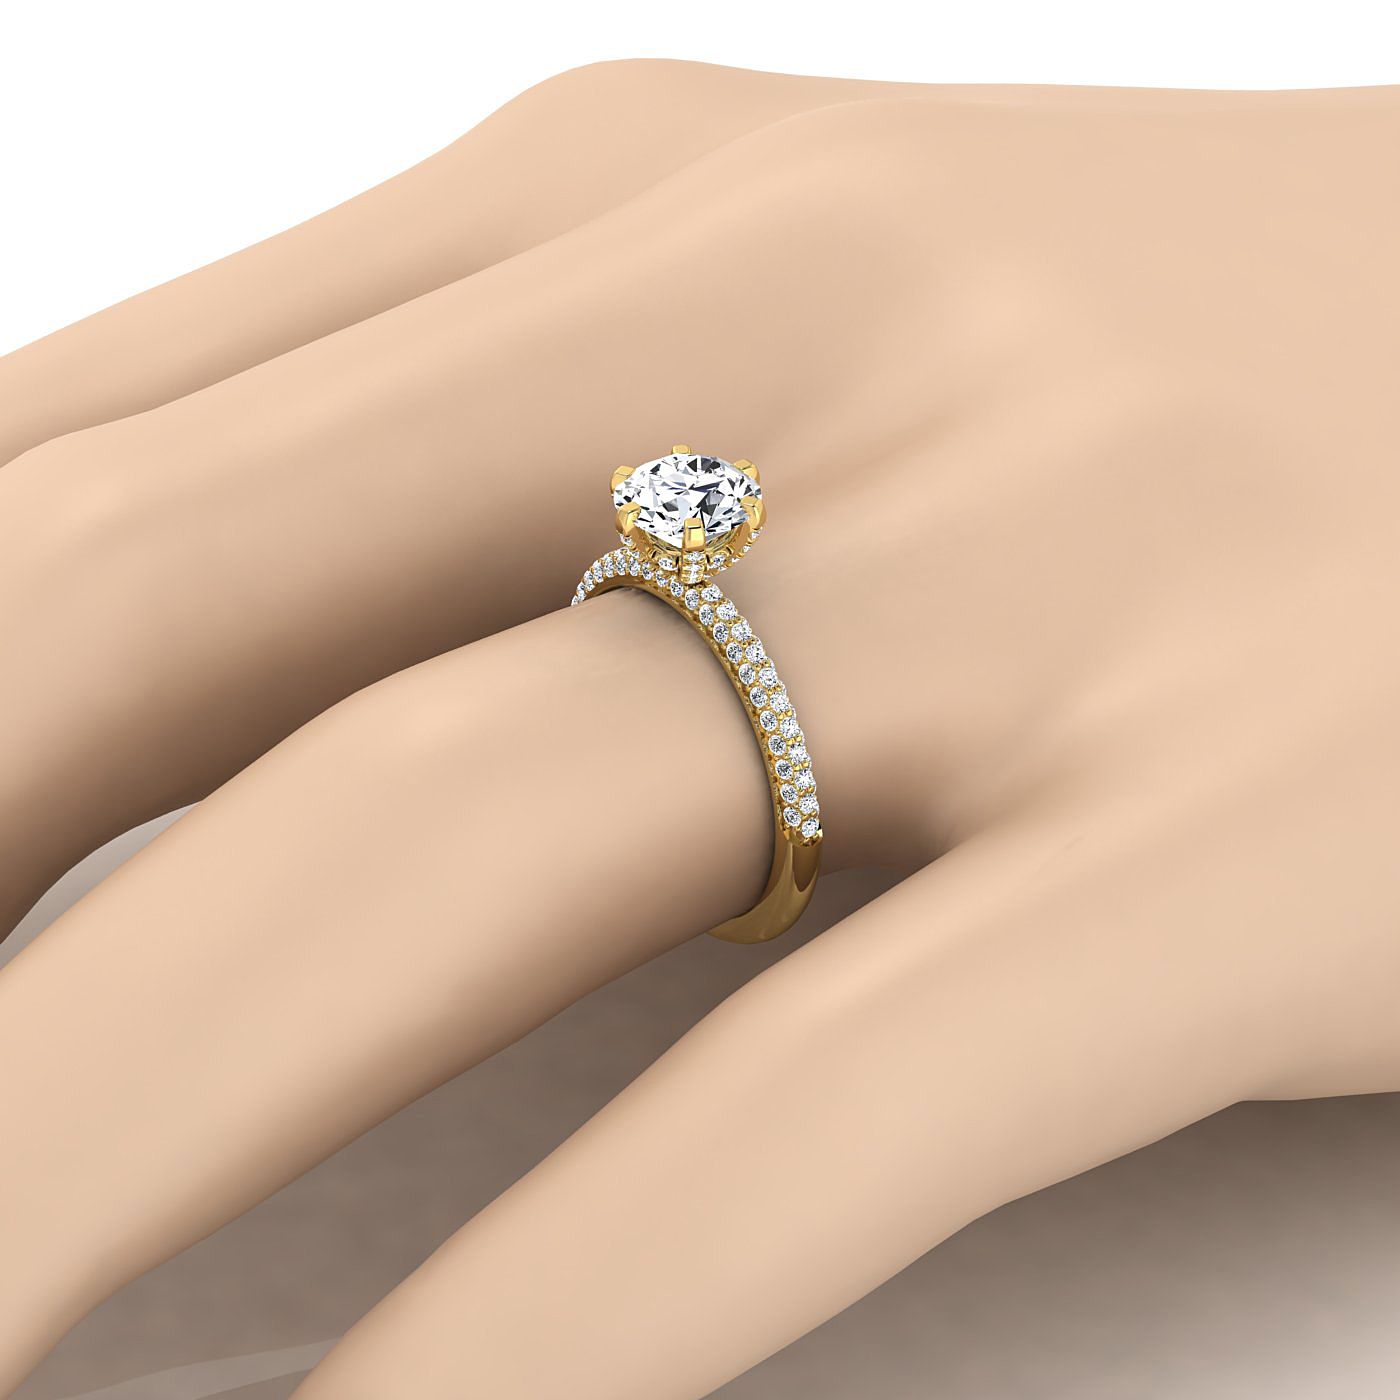 18K Yellow Gold Round Brilliant Diamond Three Row French Pave Simple Engagement Ring -1/3ctw